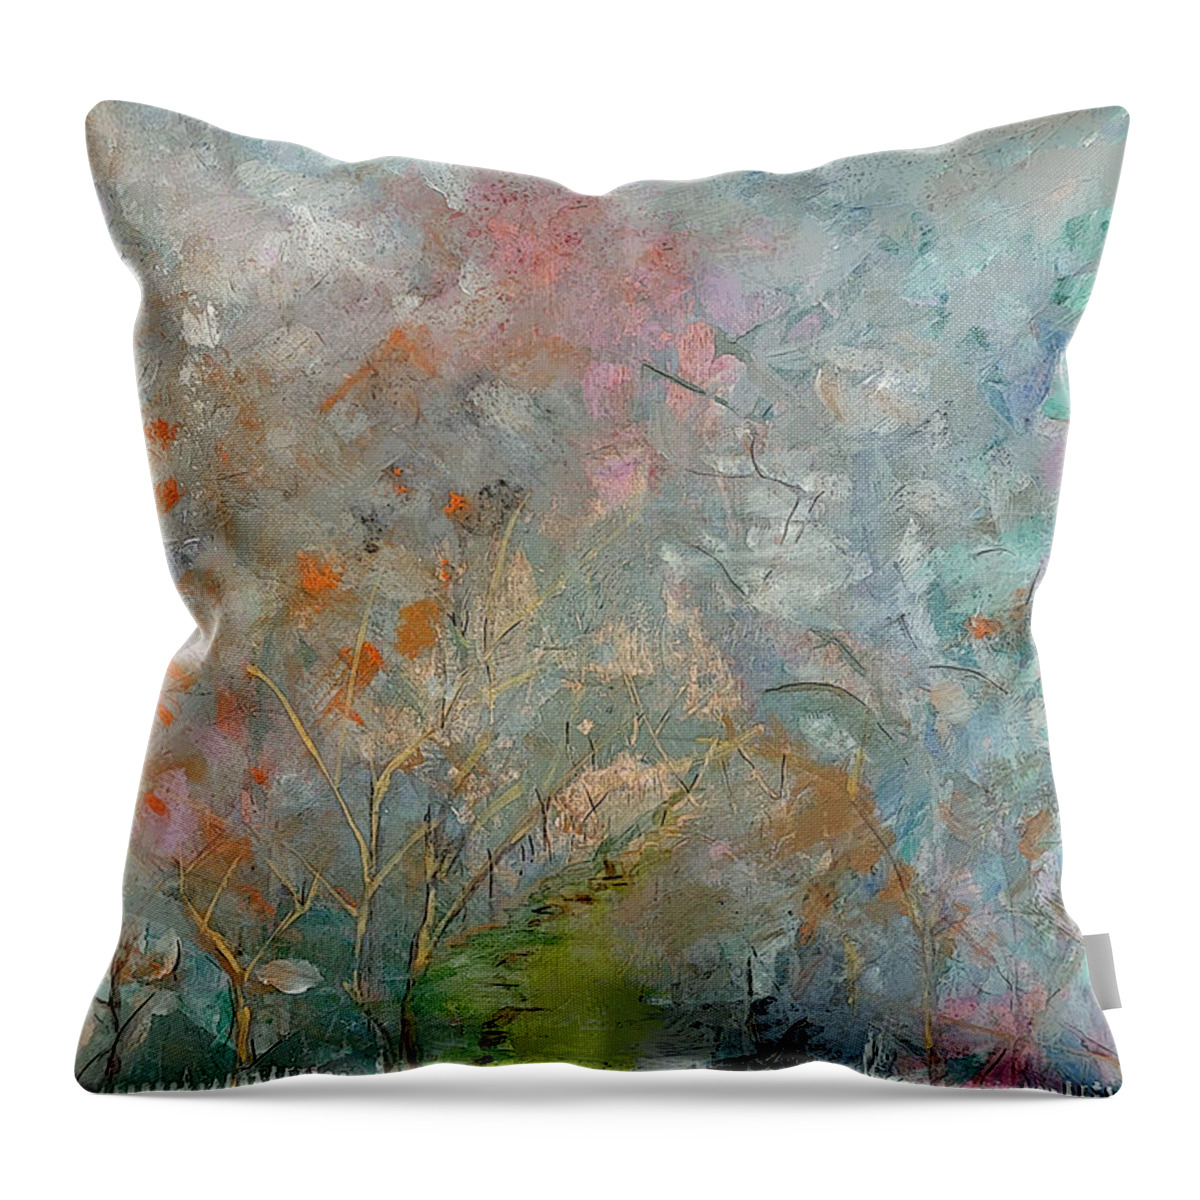 Landscape Throw Pillow featuring the painting Abstract Landscape with Fence by Lisa Kaiser